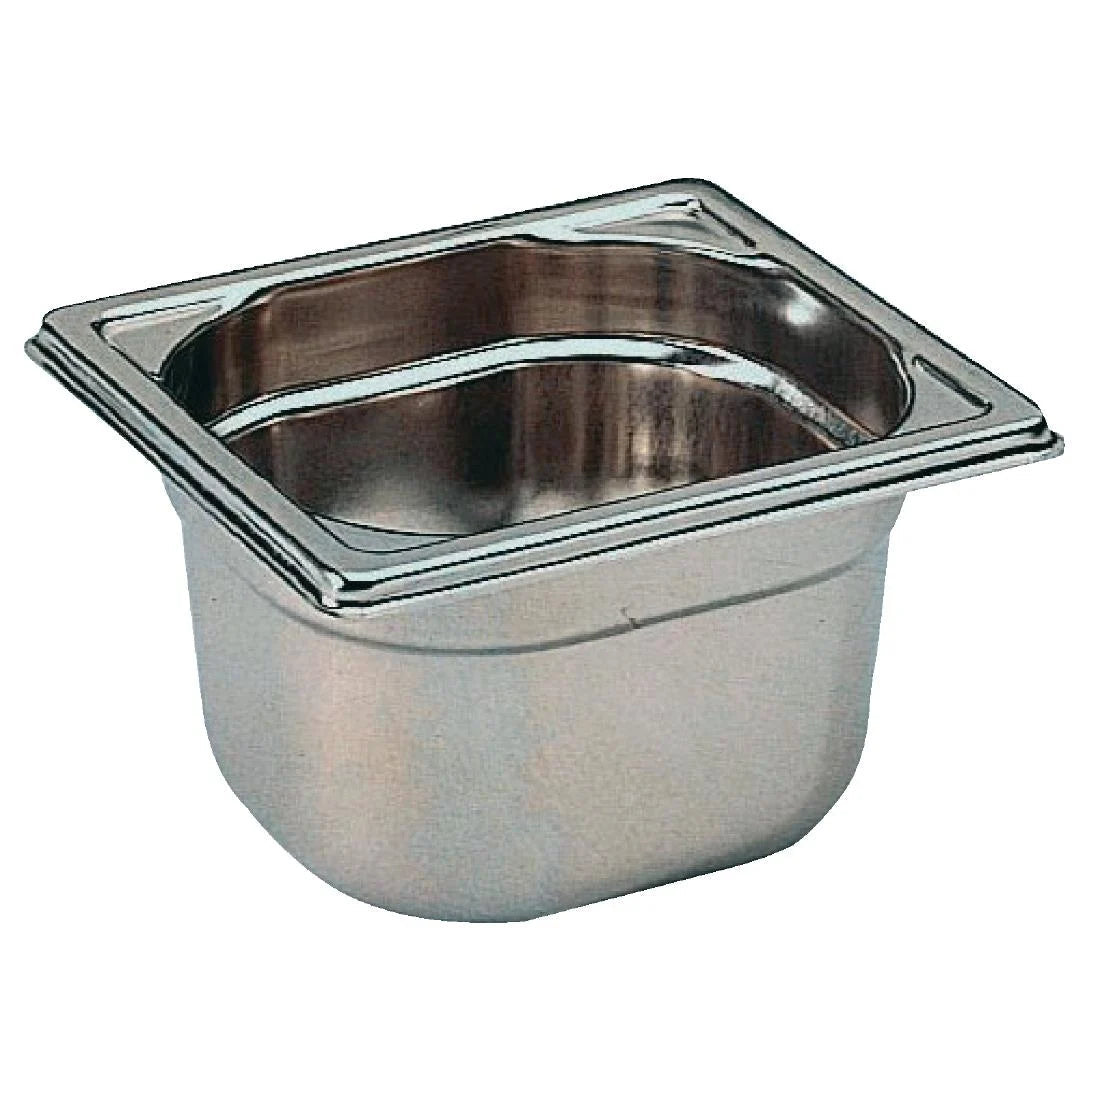 Bourgeat Stainless Steel 1/6 Gastronorm Pan 150mm JD Catering Equipment Solutions Ltd